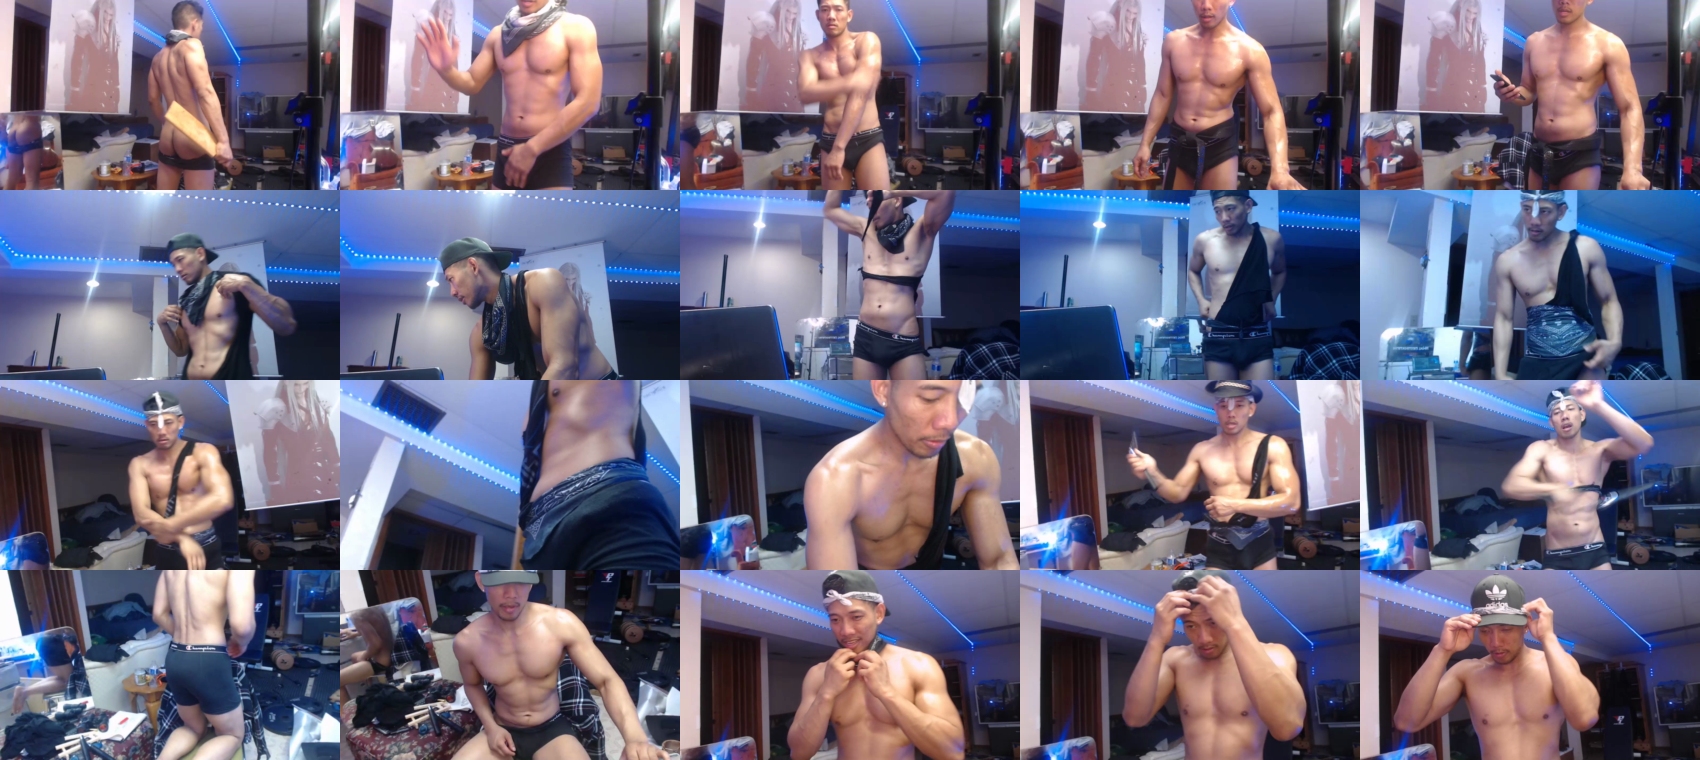 chadclouds suck CAM SHOW @ Chaturbate 22-07-2022